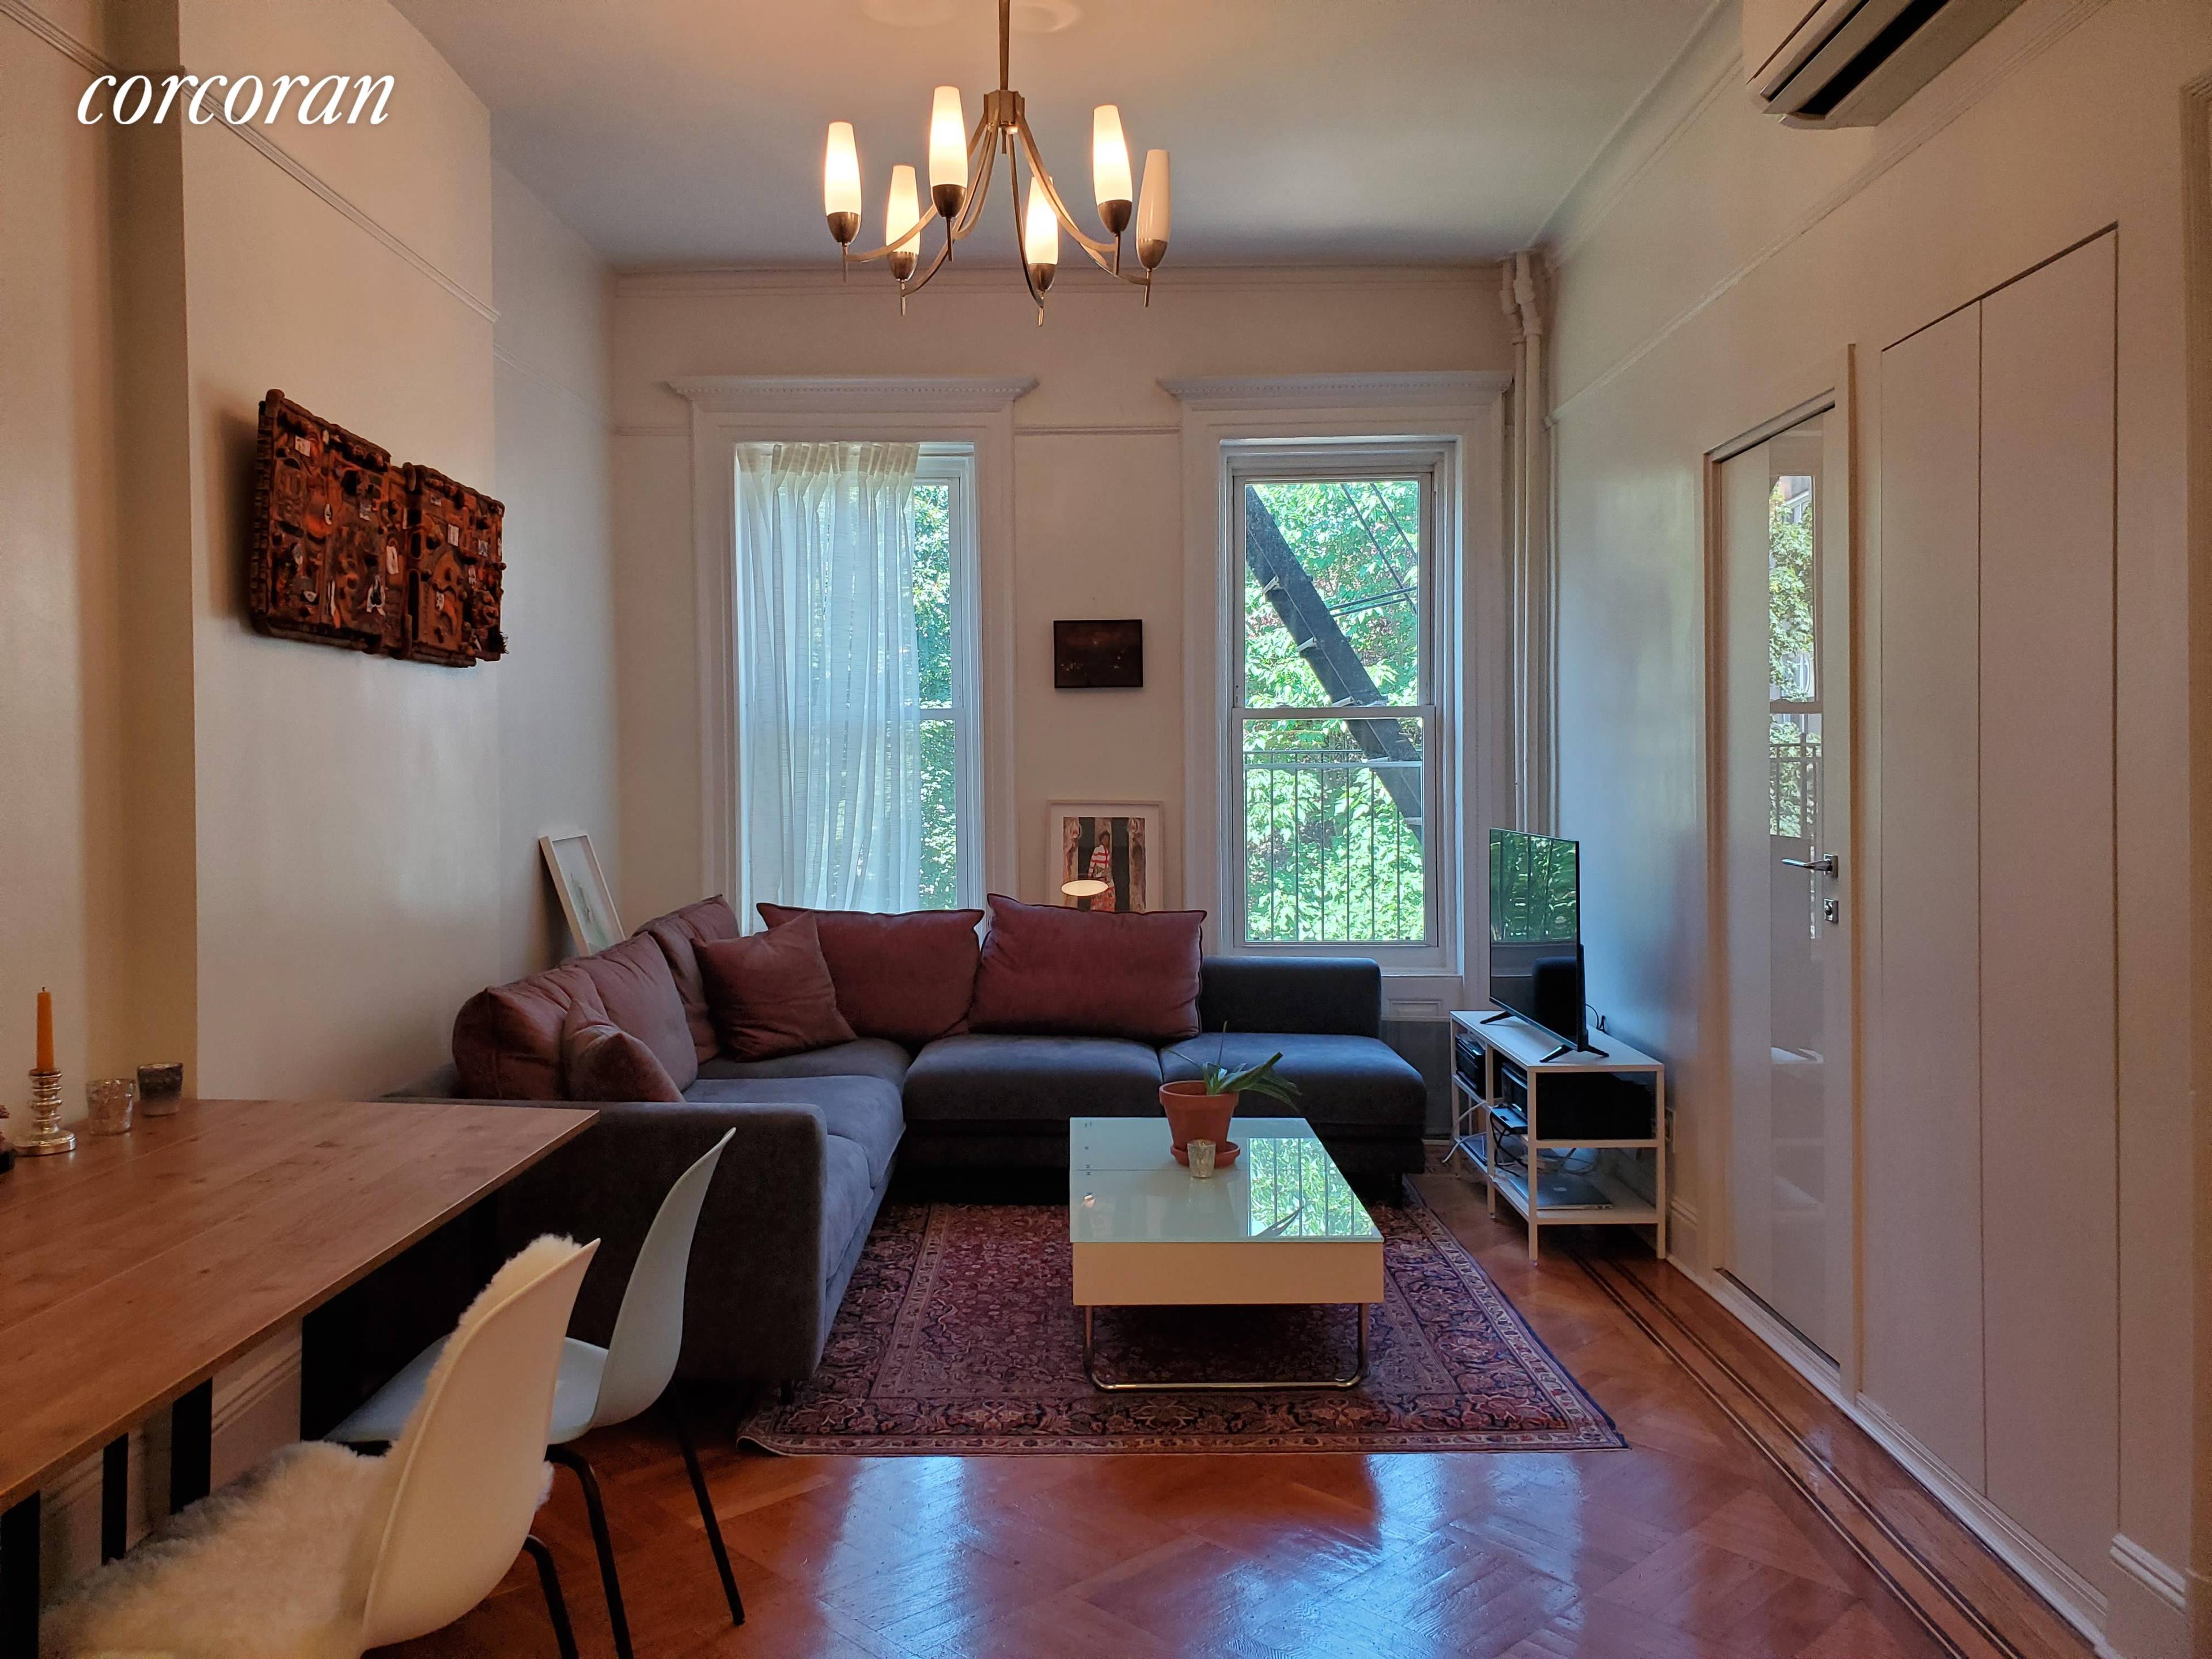 Stunning sun filled immaculate one bedroom, 1 bathroom Crown Heights barrel front, limestone townhouse is the perfect place to call home.